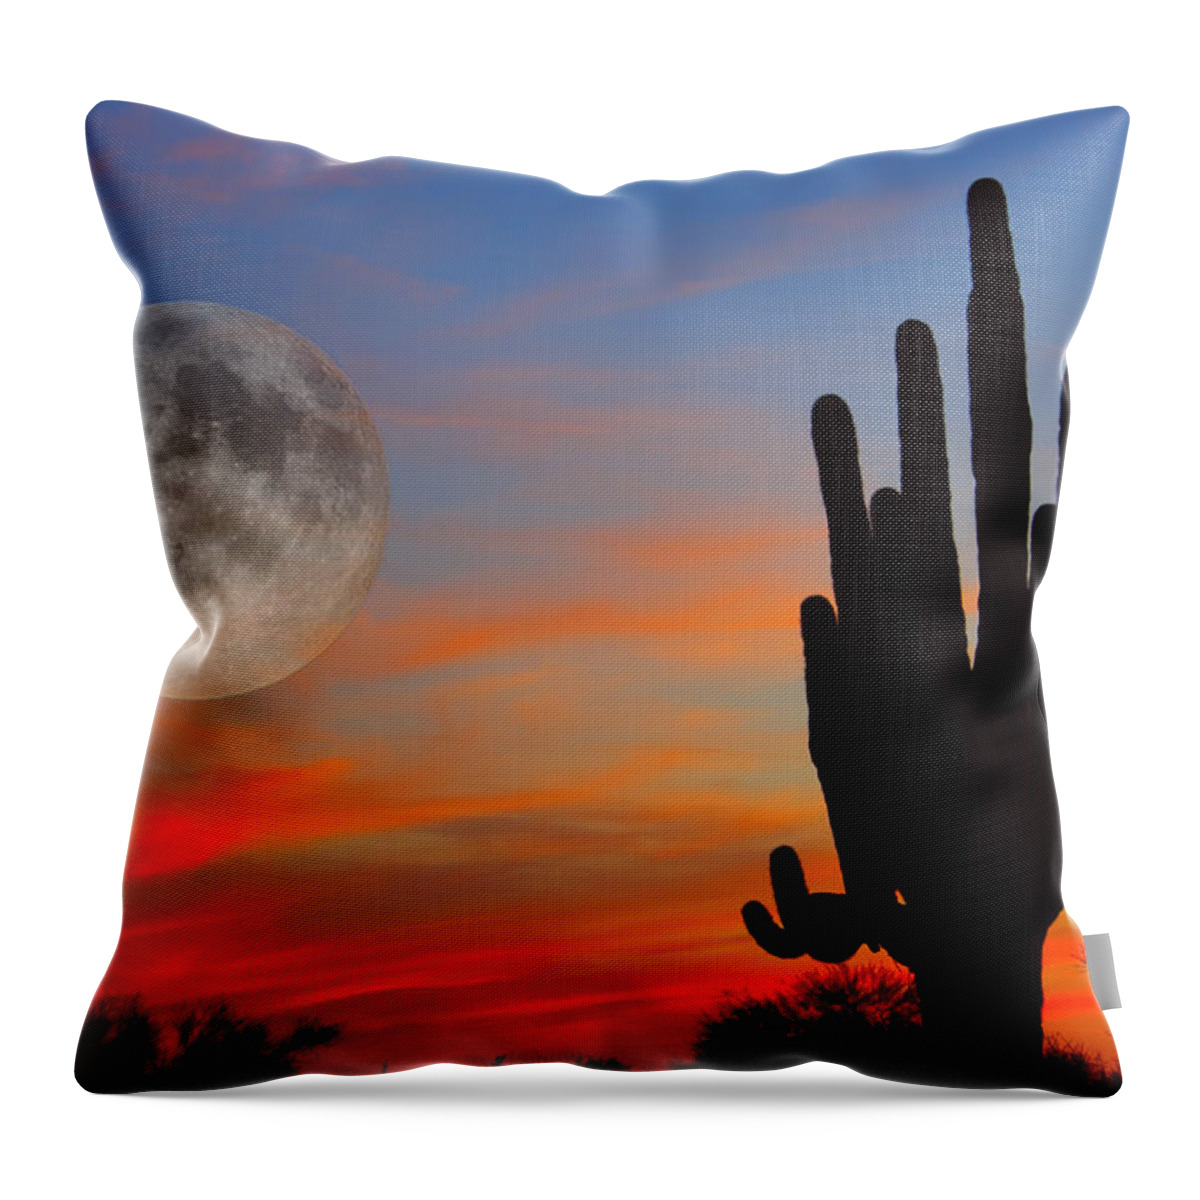 Sunrise Throw Pillow featuring the photograph Saguaro Full Moon Sunset by James BO Insogna